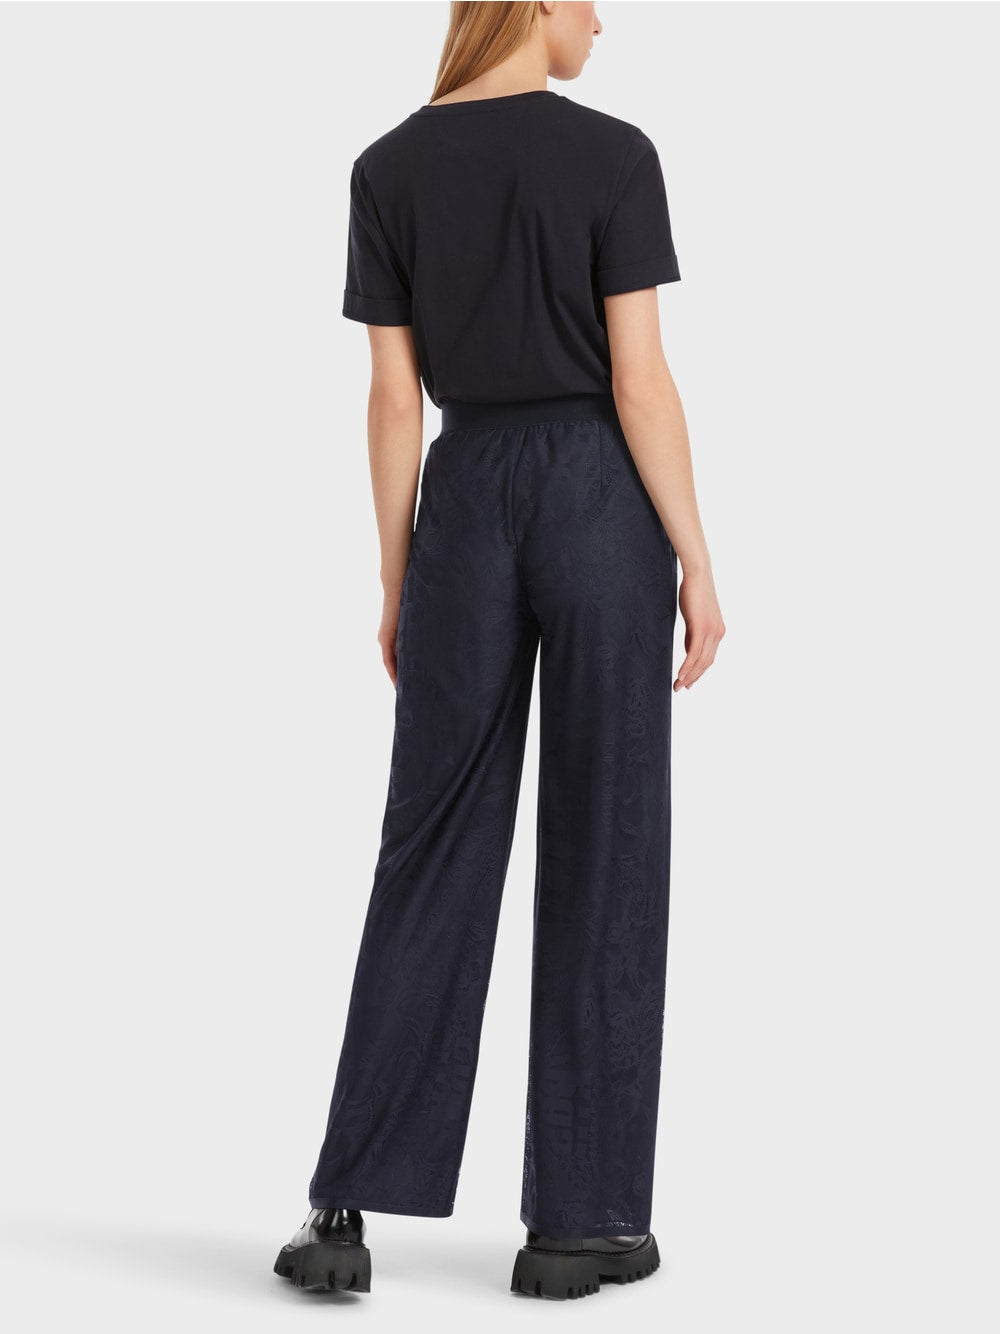 Marc Cain Welby Pant in Tulle Lace